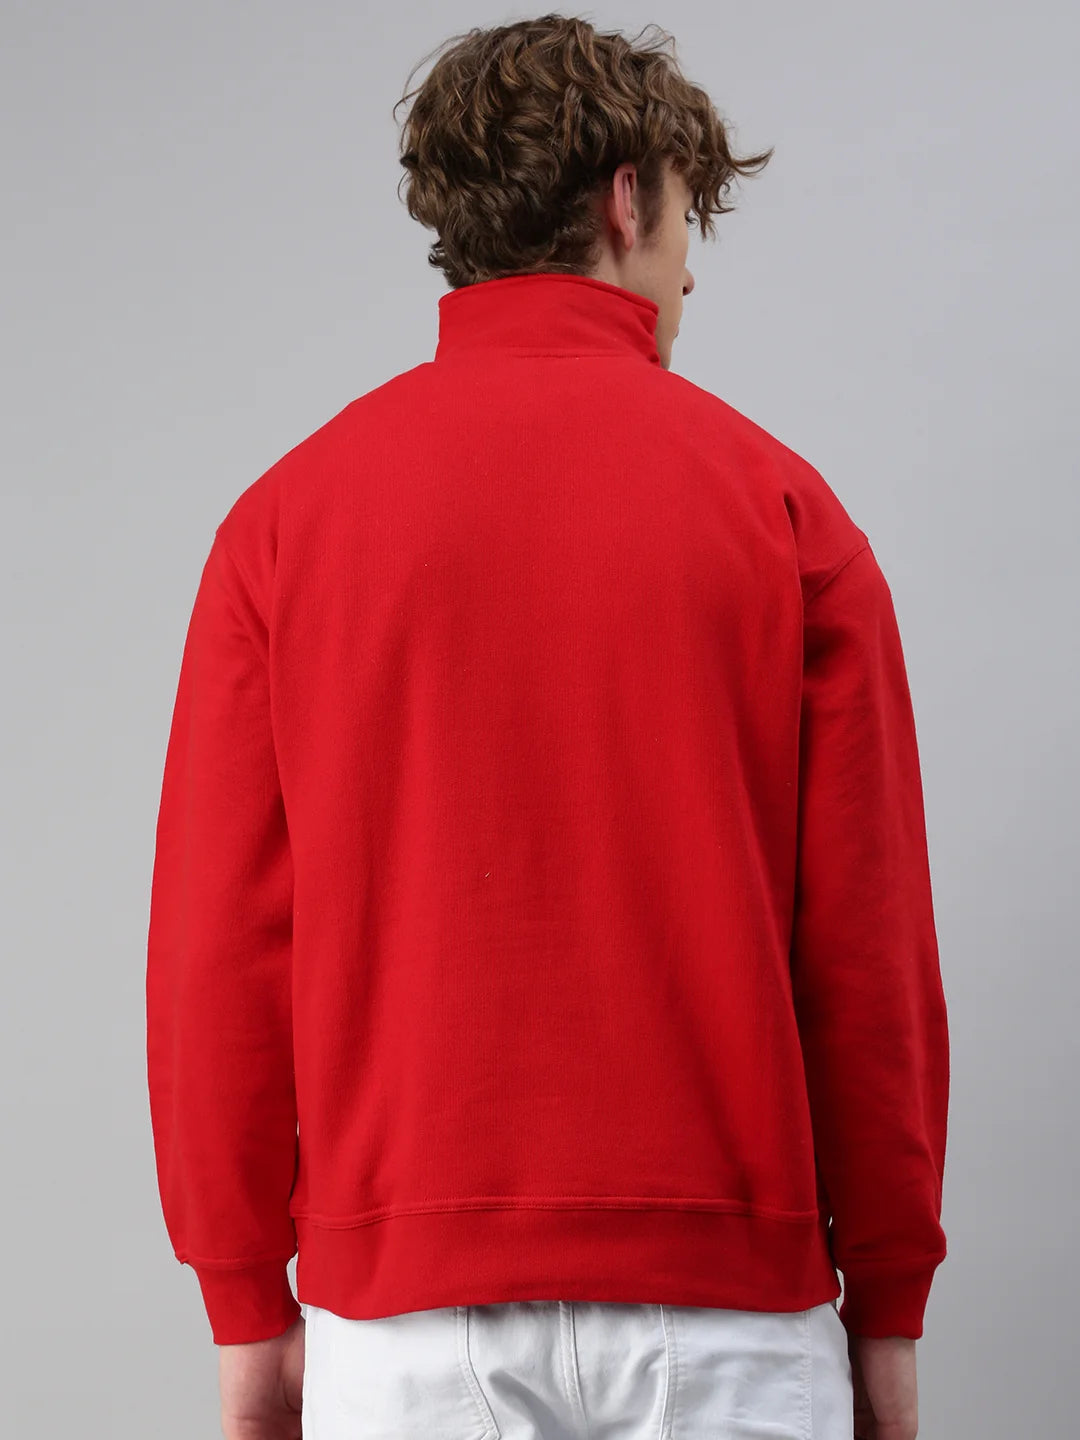 Sweatshirt with quarter zipper made of polyester